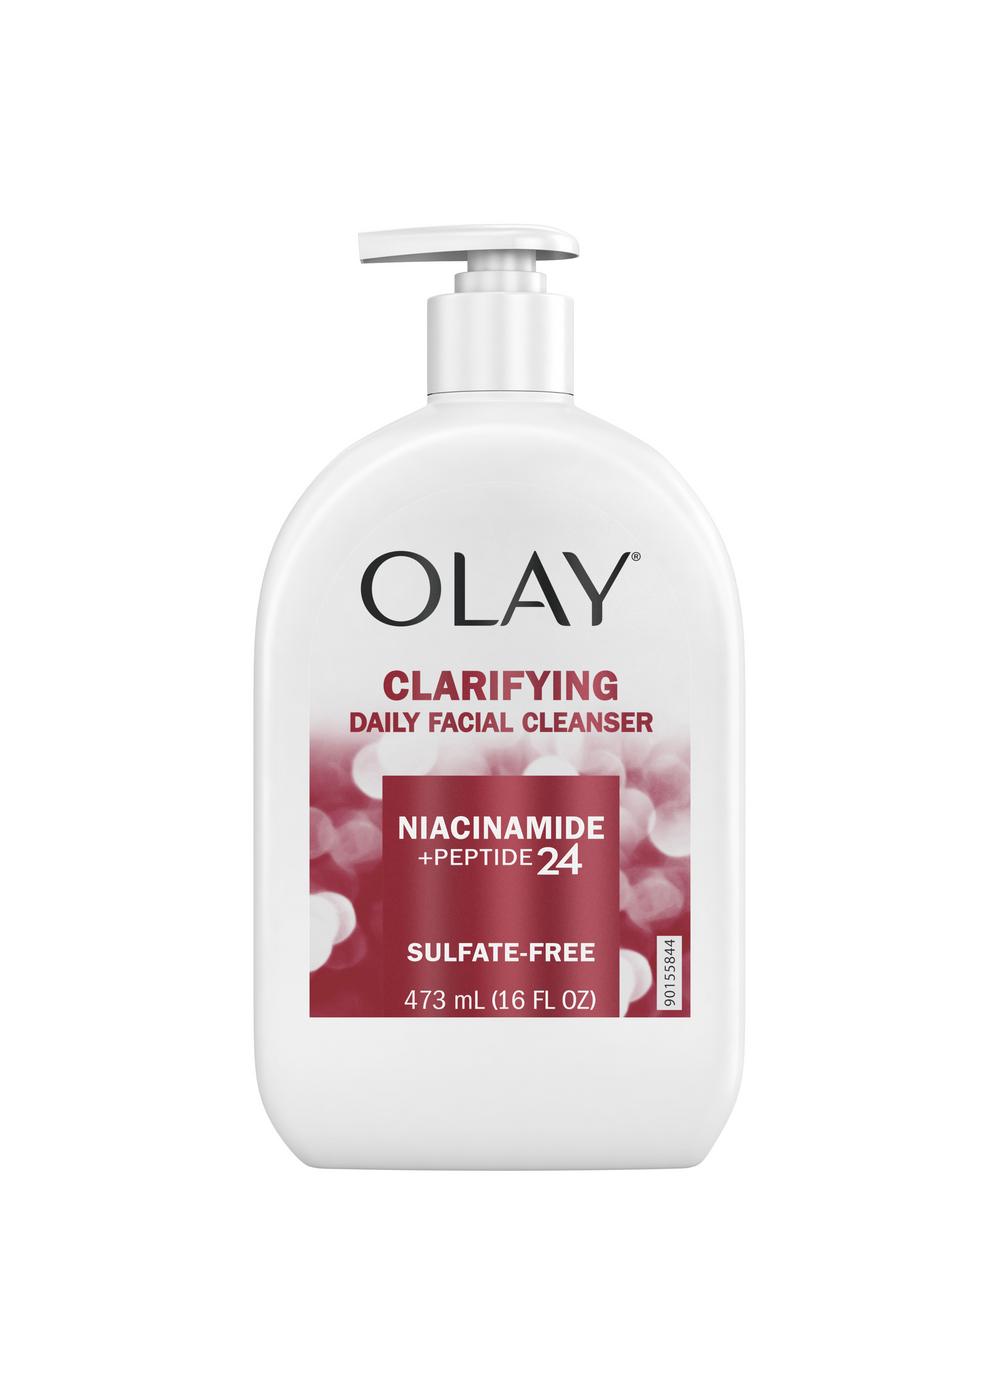 Olay Niacinamide + Peptide 24 Clarifying Daily Facial Cleanser; image 1 of 2